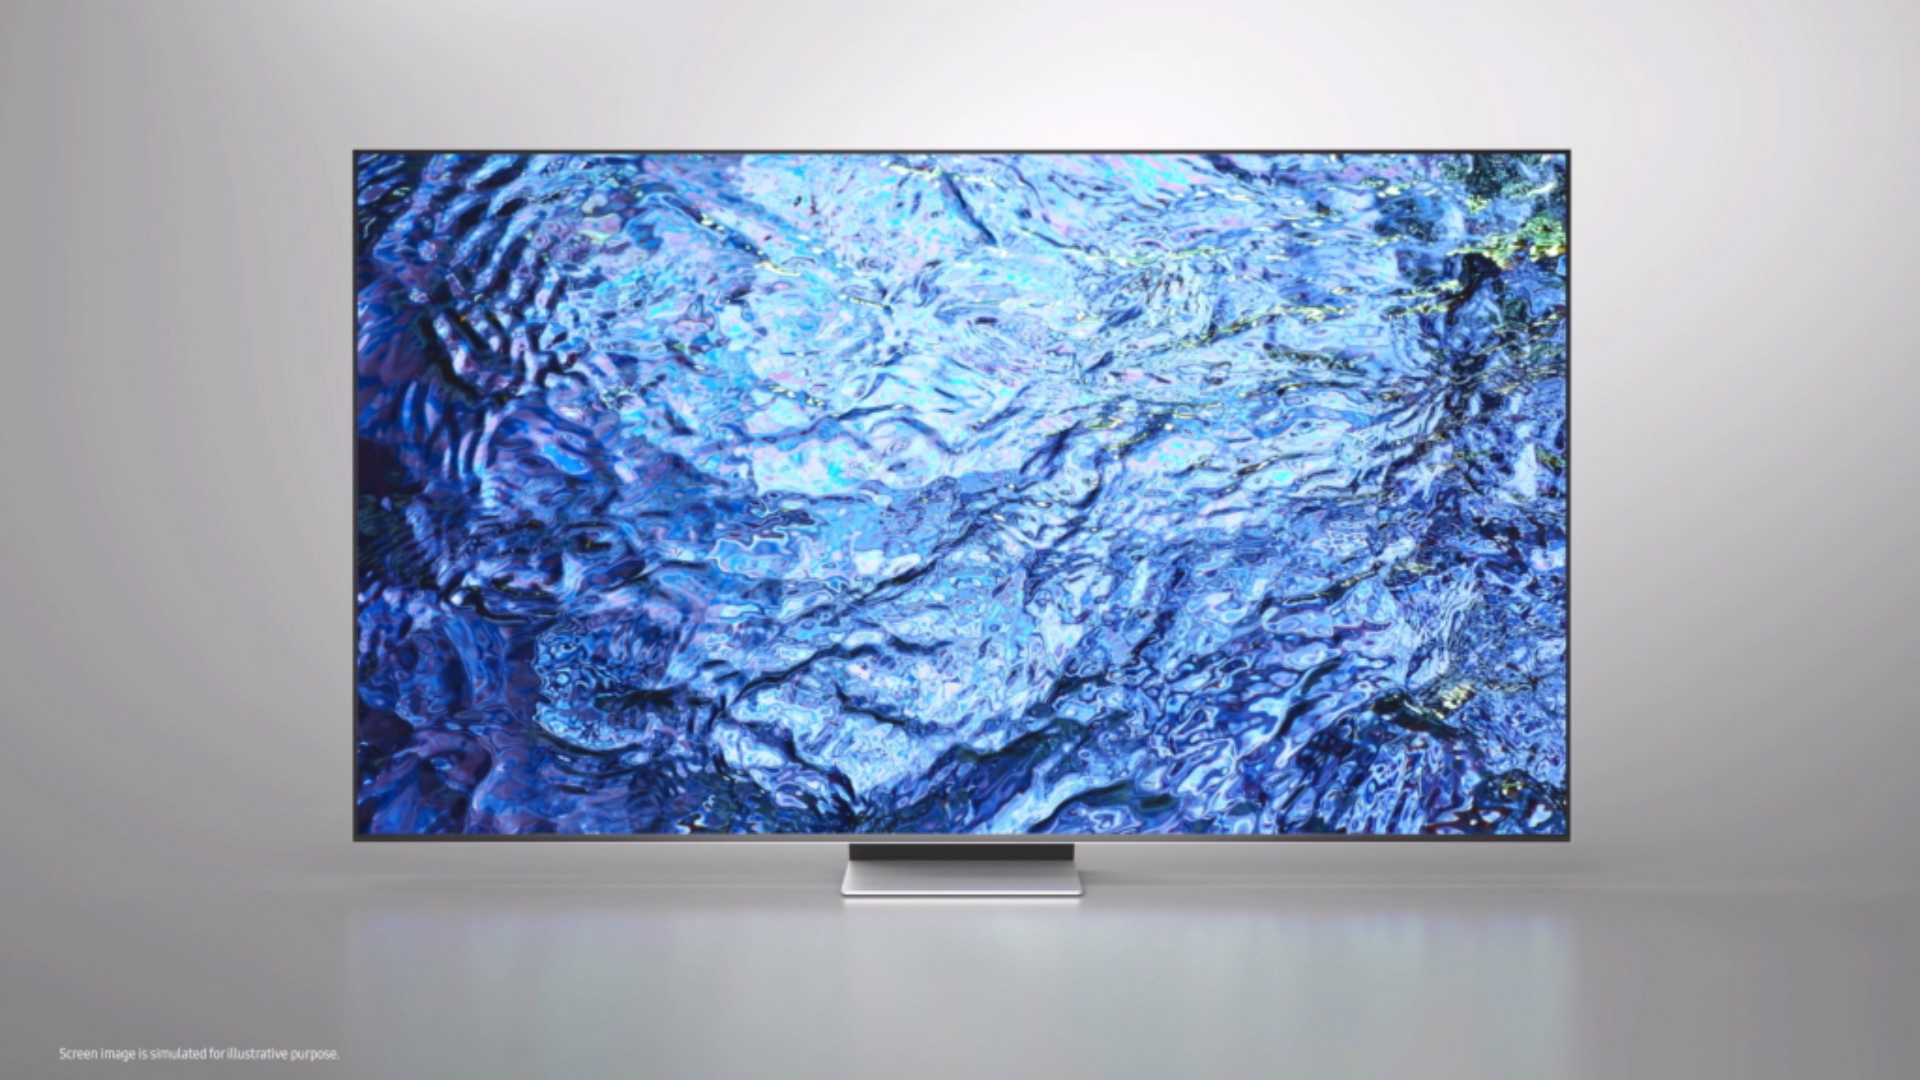 Samsung launches its new QLED, Neo QLED, and QD-OLED TVs in Singapore -  SamMobile